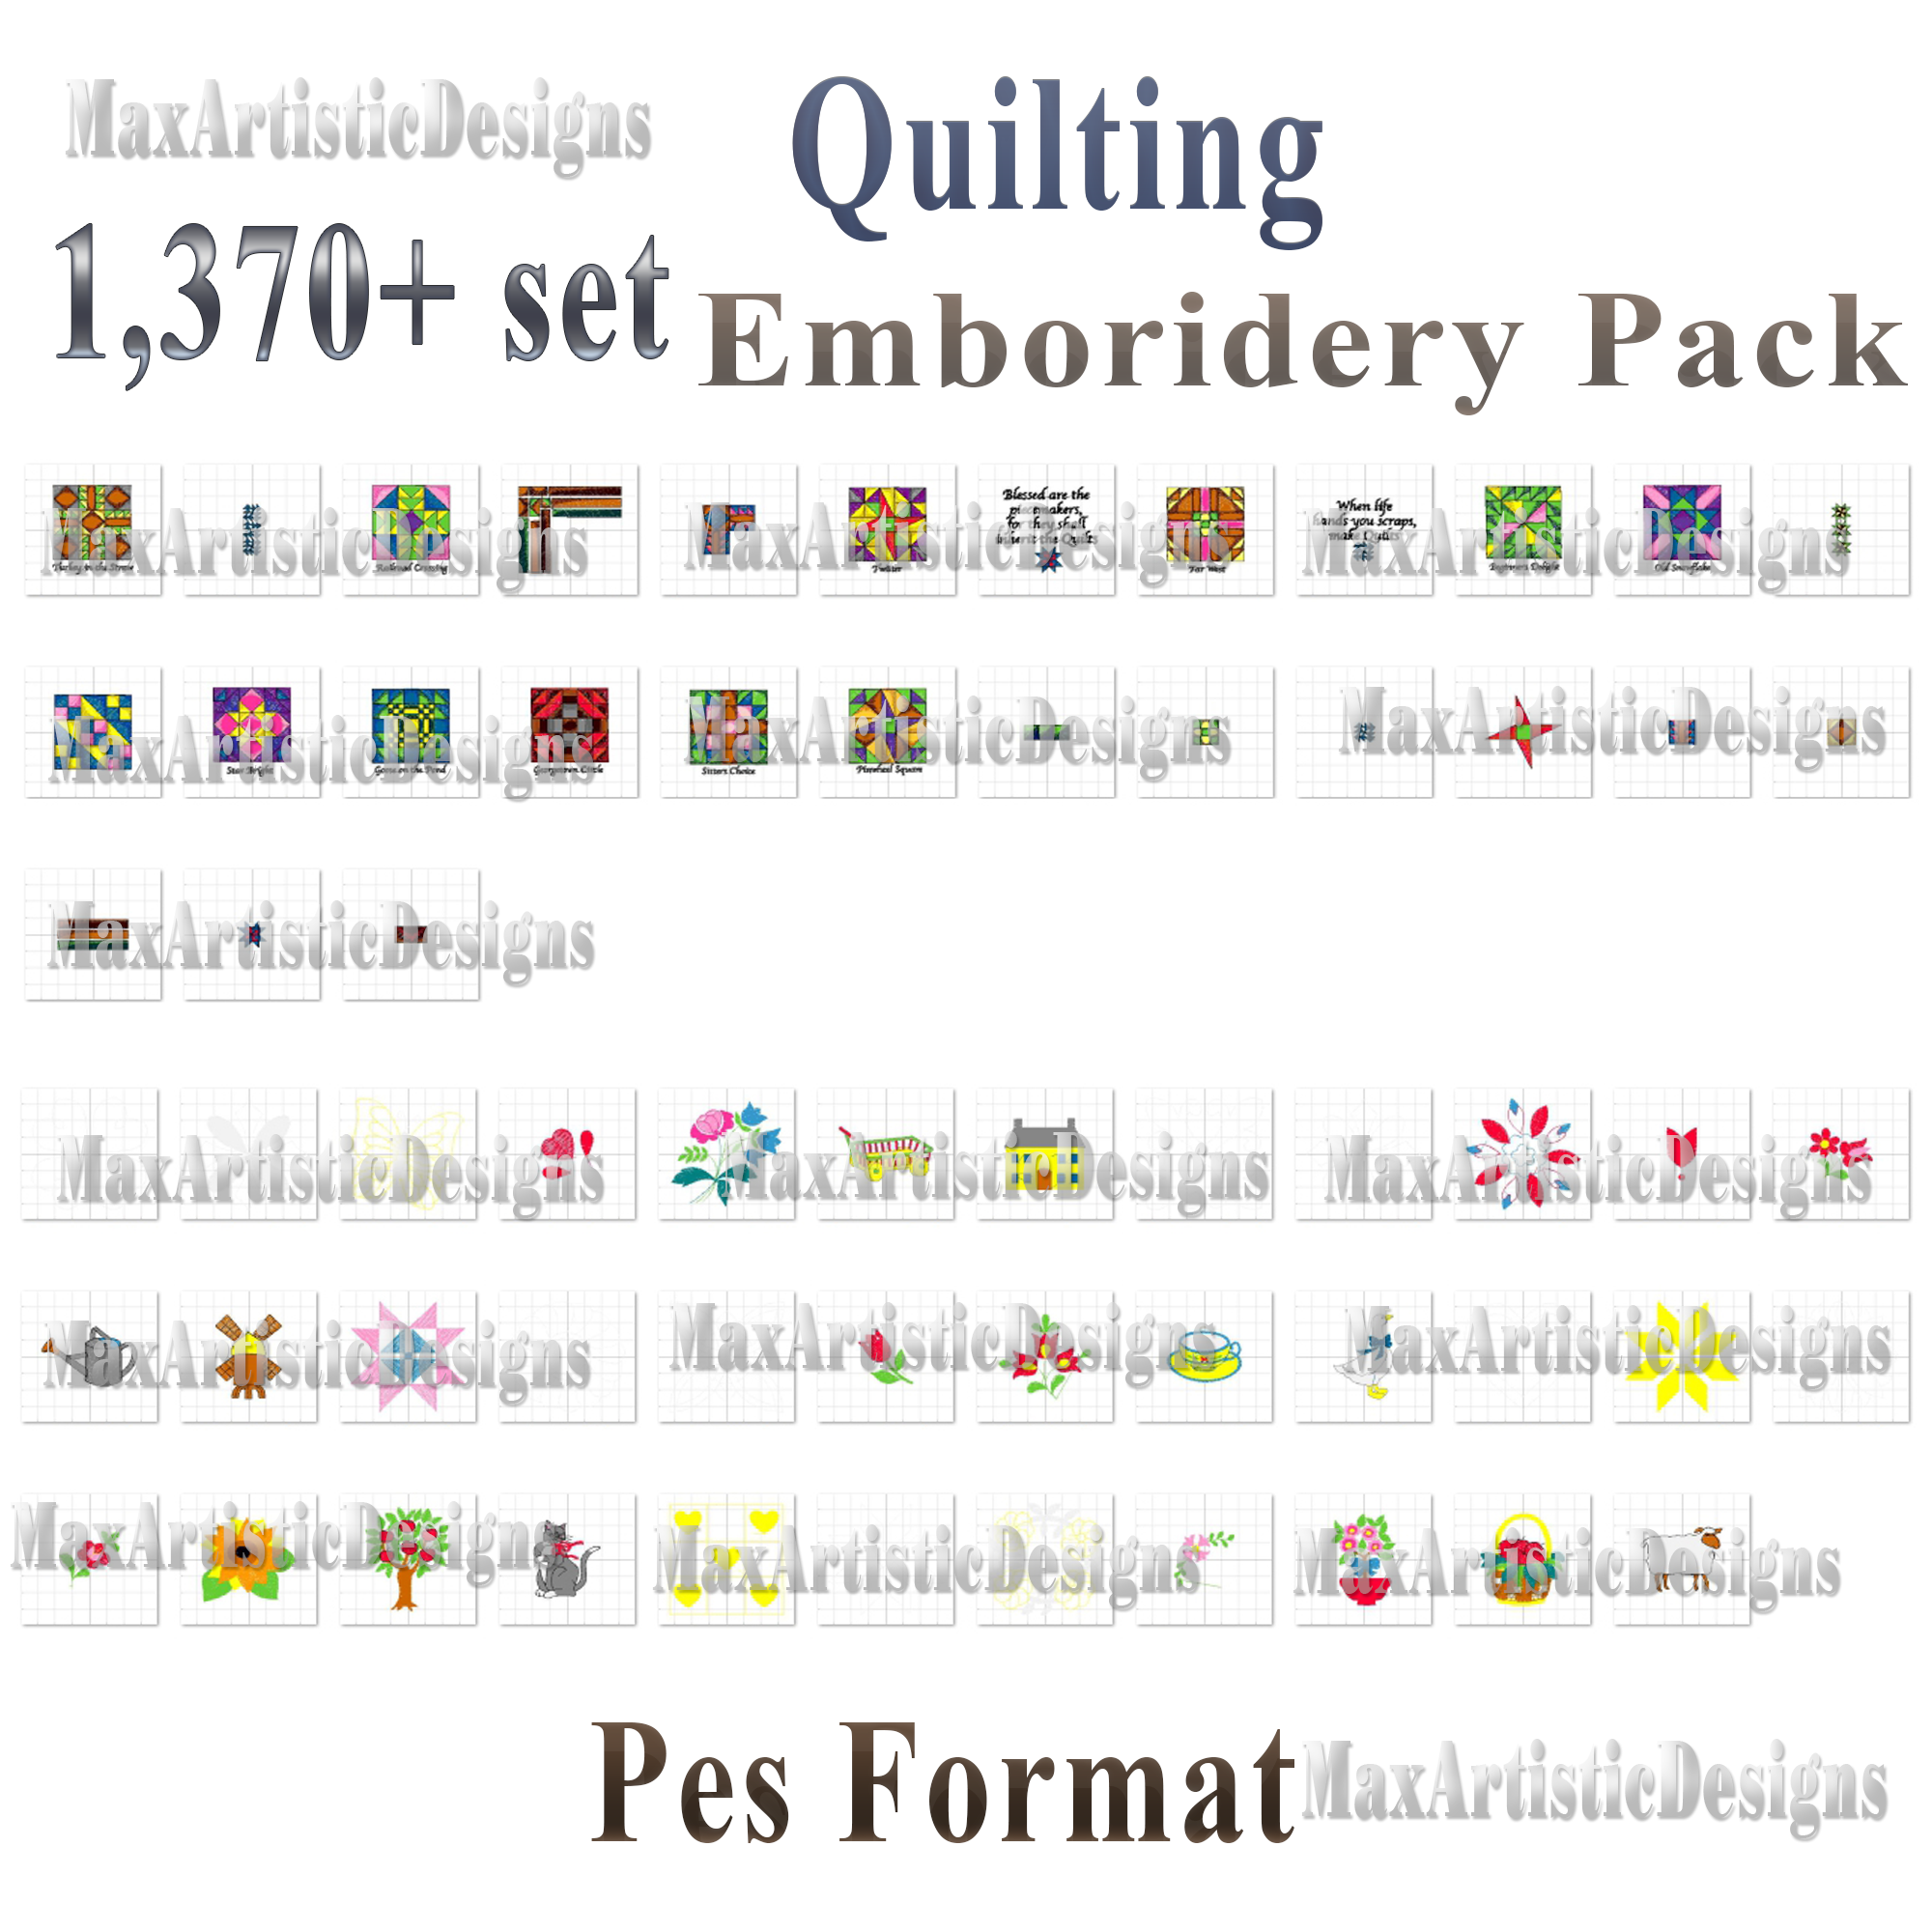 1370+ Quilting embroidery patterns Machine embroidery designs